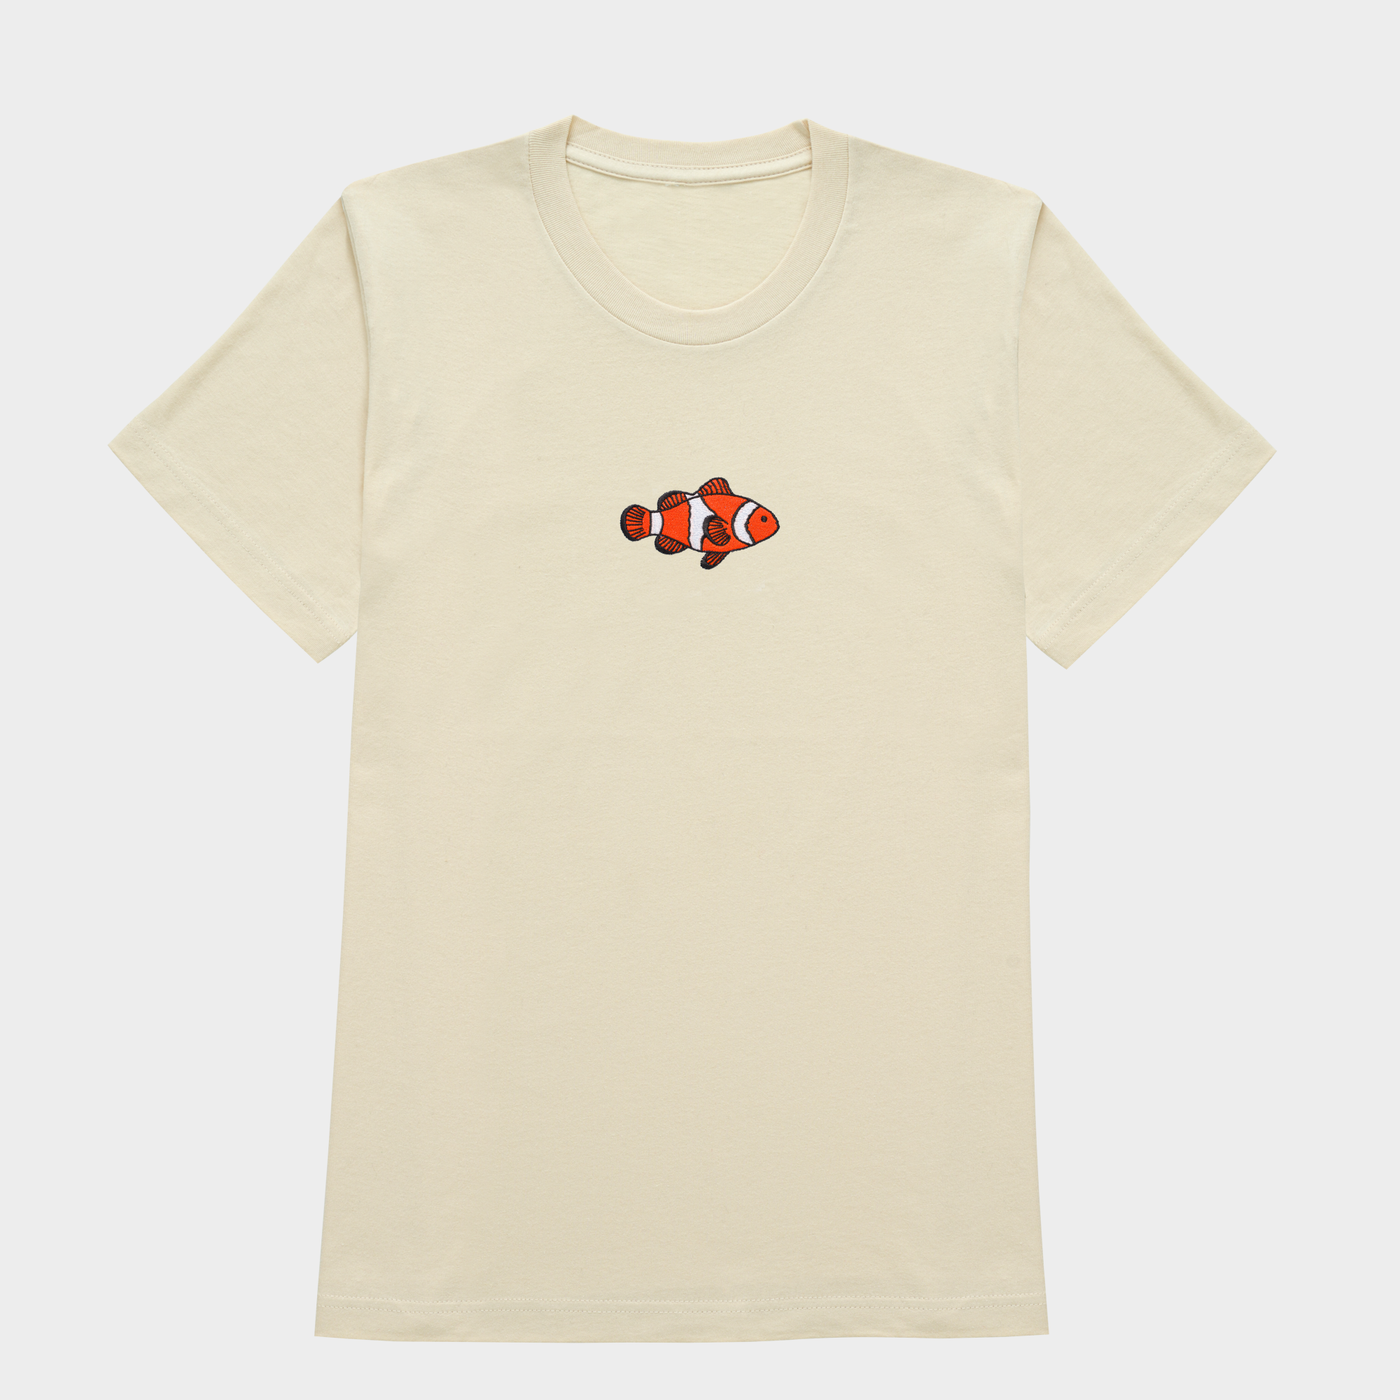 Bobby's Planet Women's Embroidered Clownfish T-Shirt from Seven Seas Fish Animals Collection in Soft Cream Color#color_soft-cream